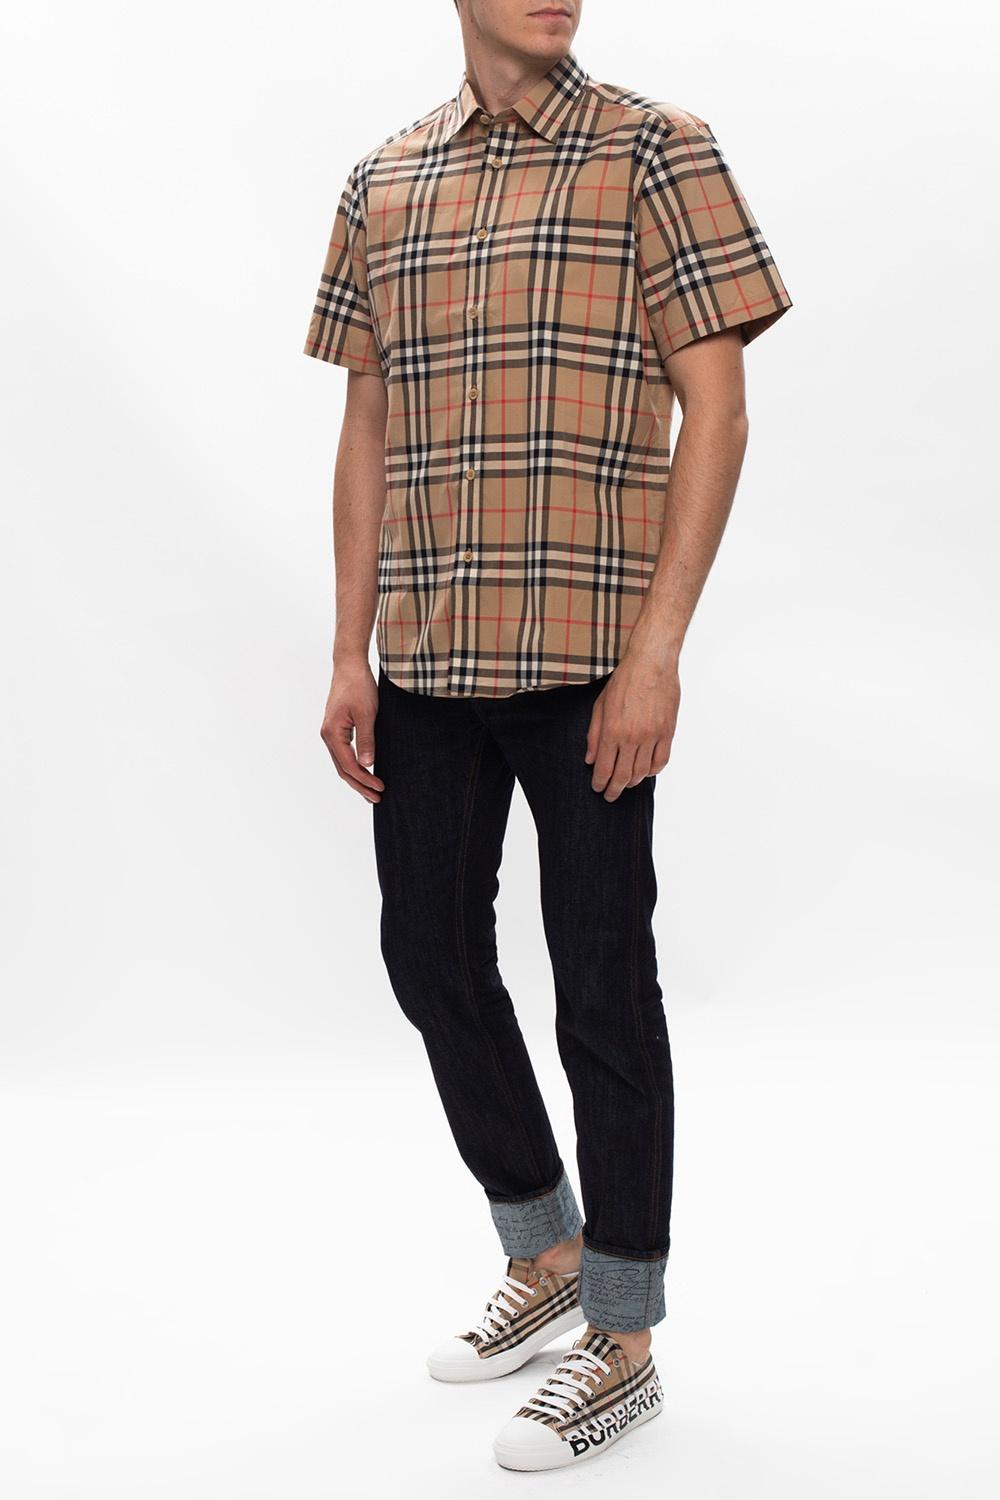 Burberry Vintage Check Woven Shirt in Brown for Men | Lyst